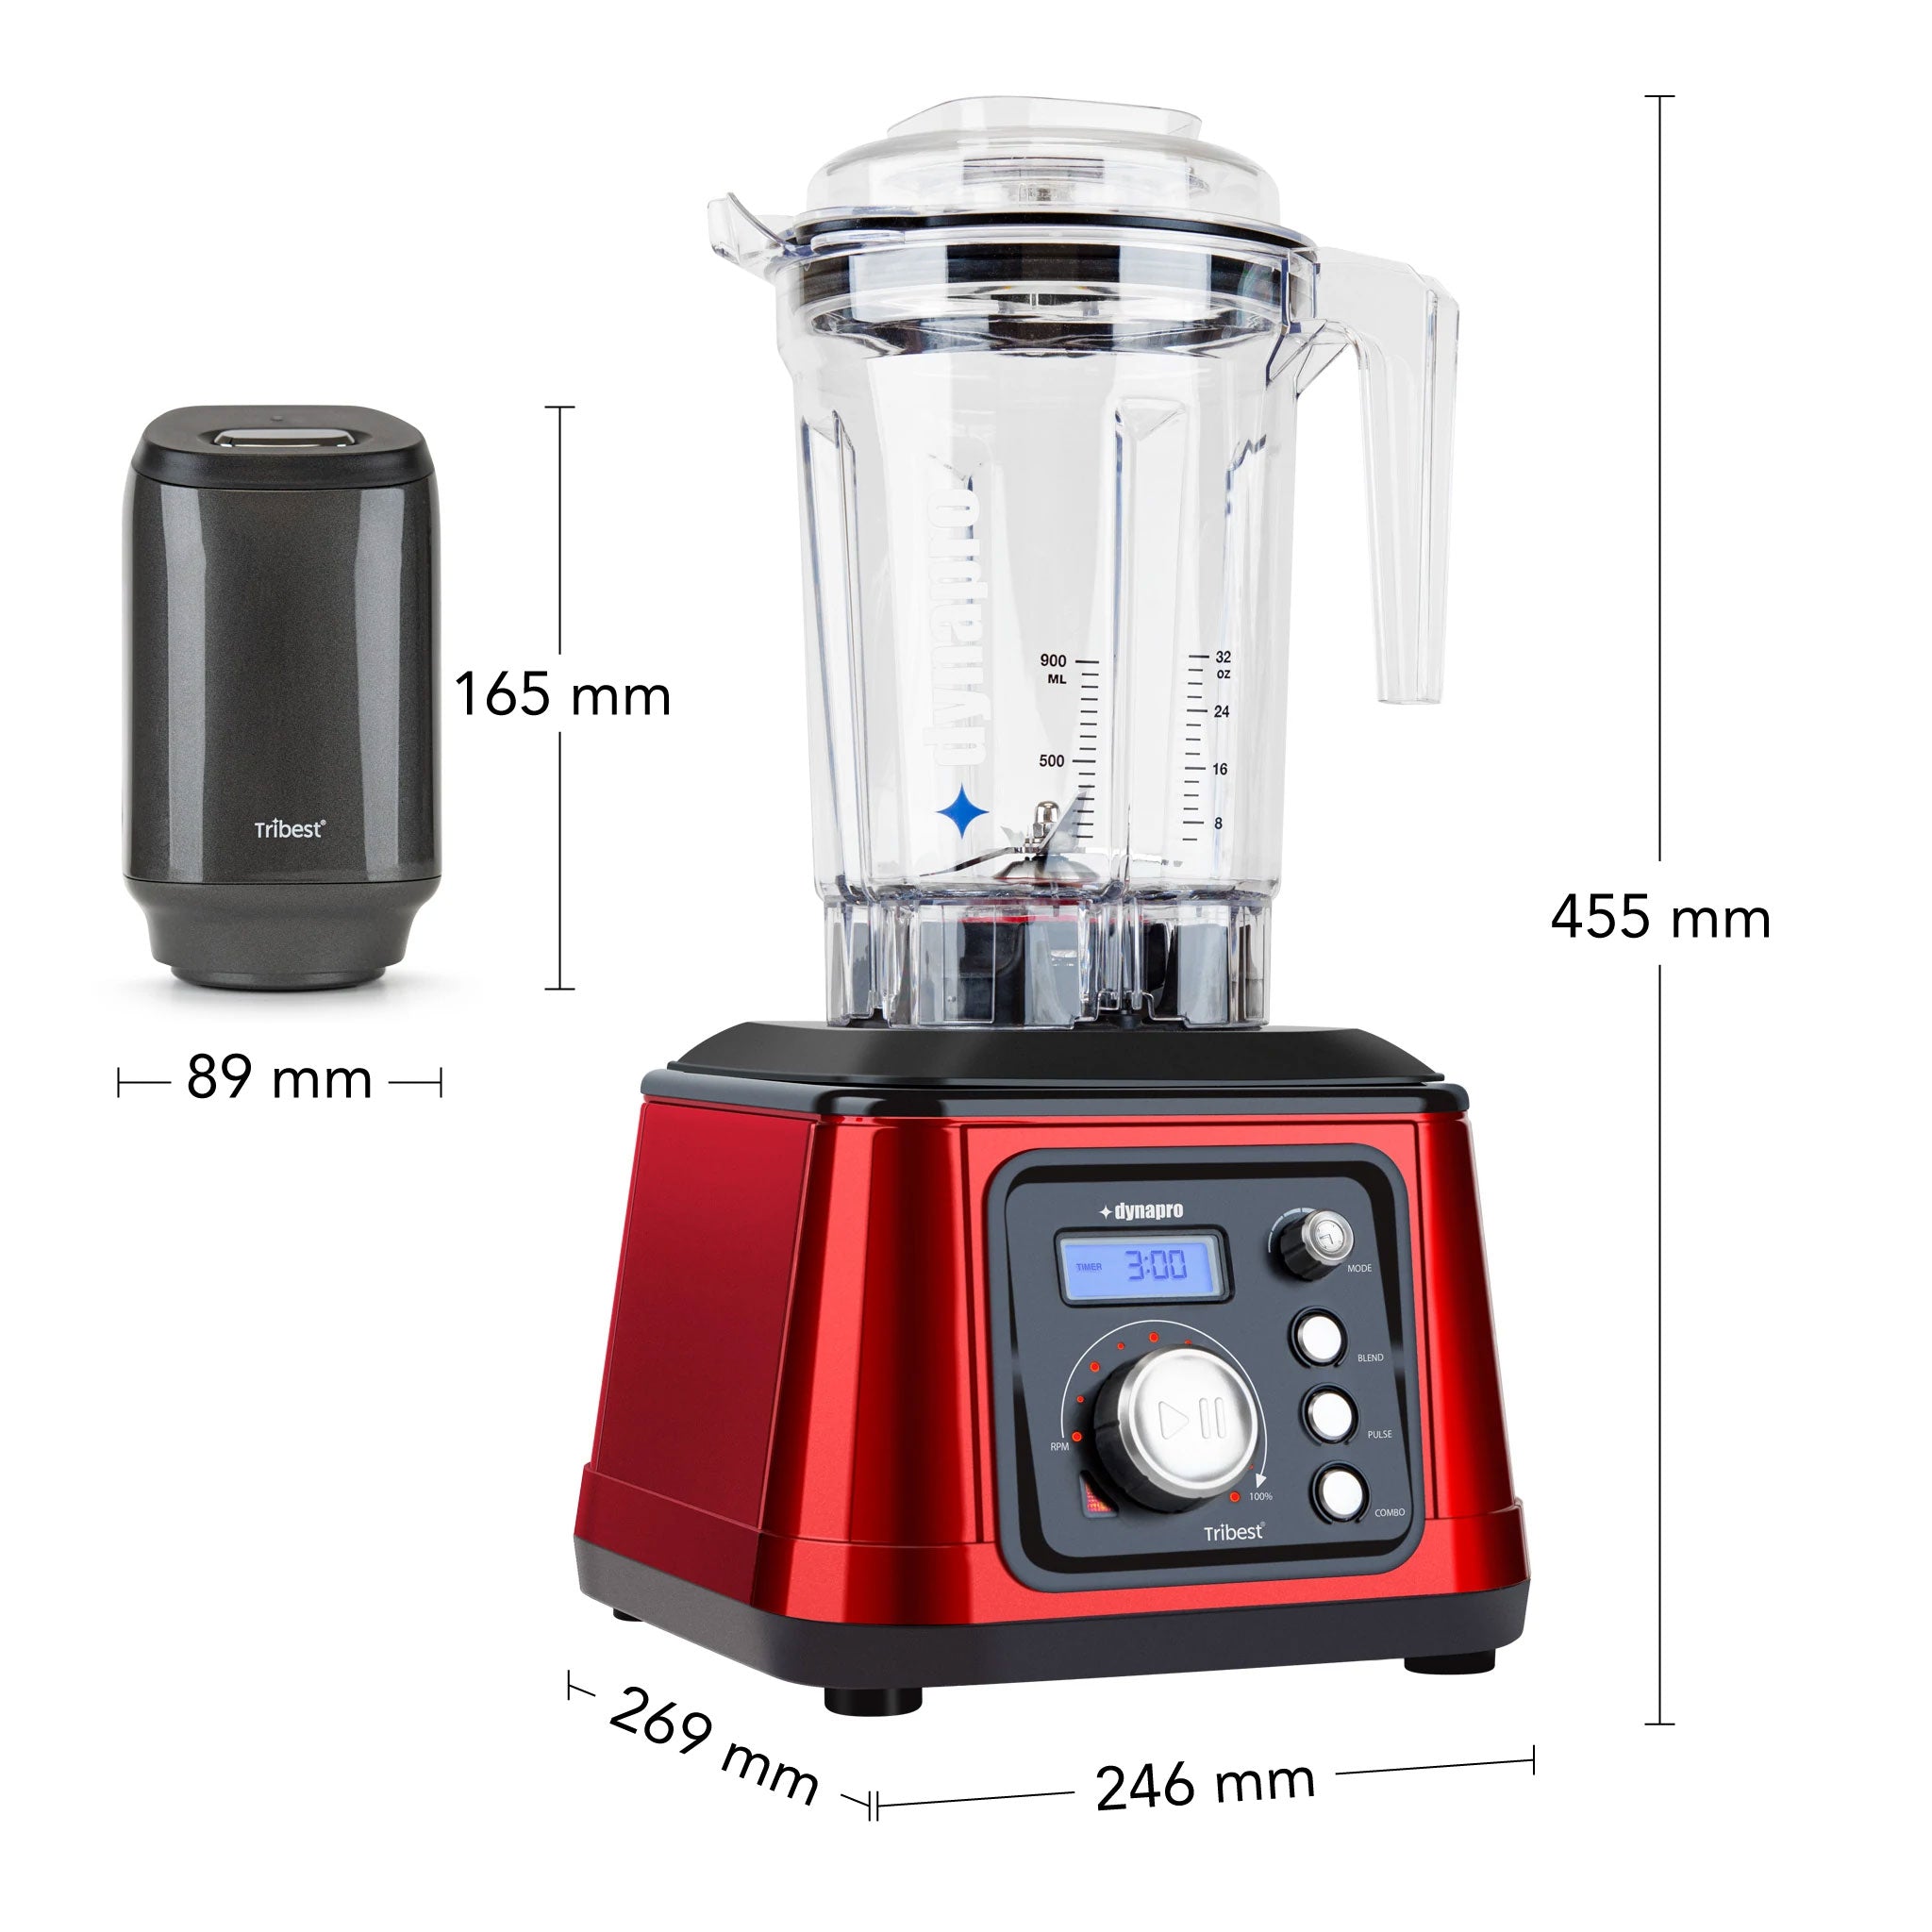 Dynapro® Commercial High-Speed Vacuum Blender in Red - Size 246 x 269 x 455 mm